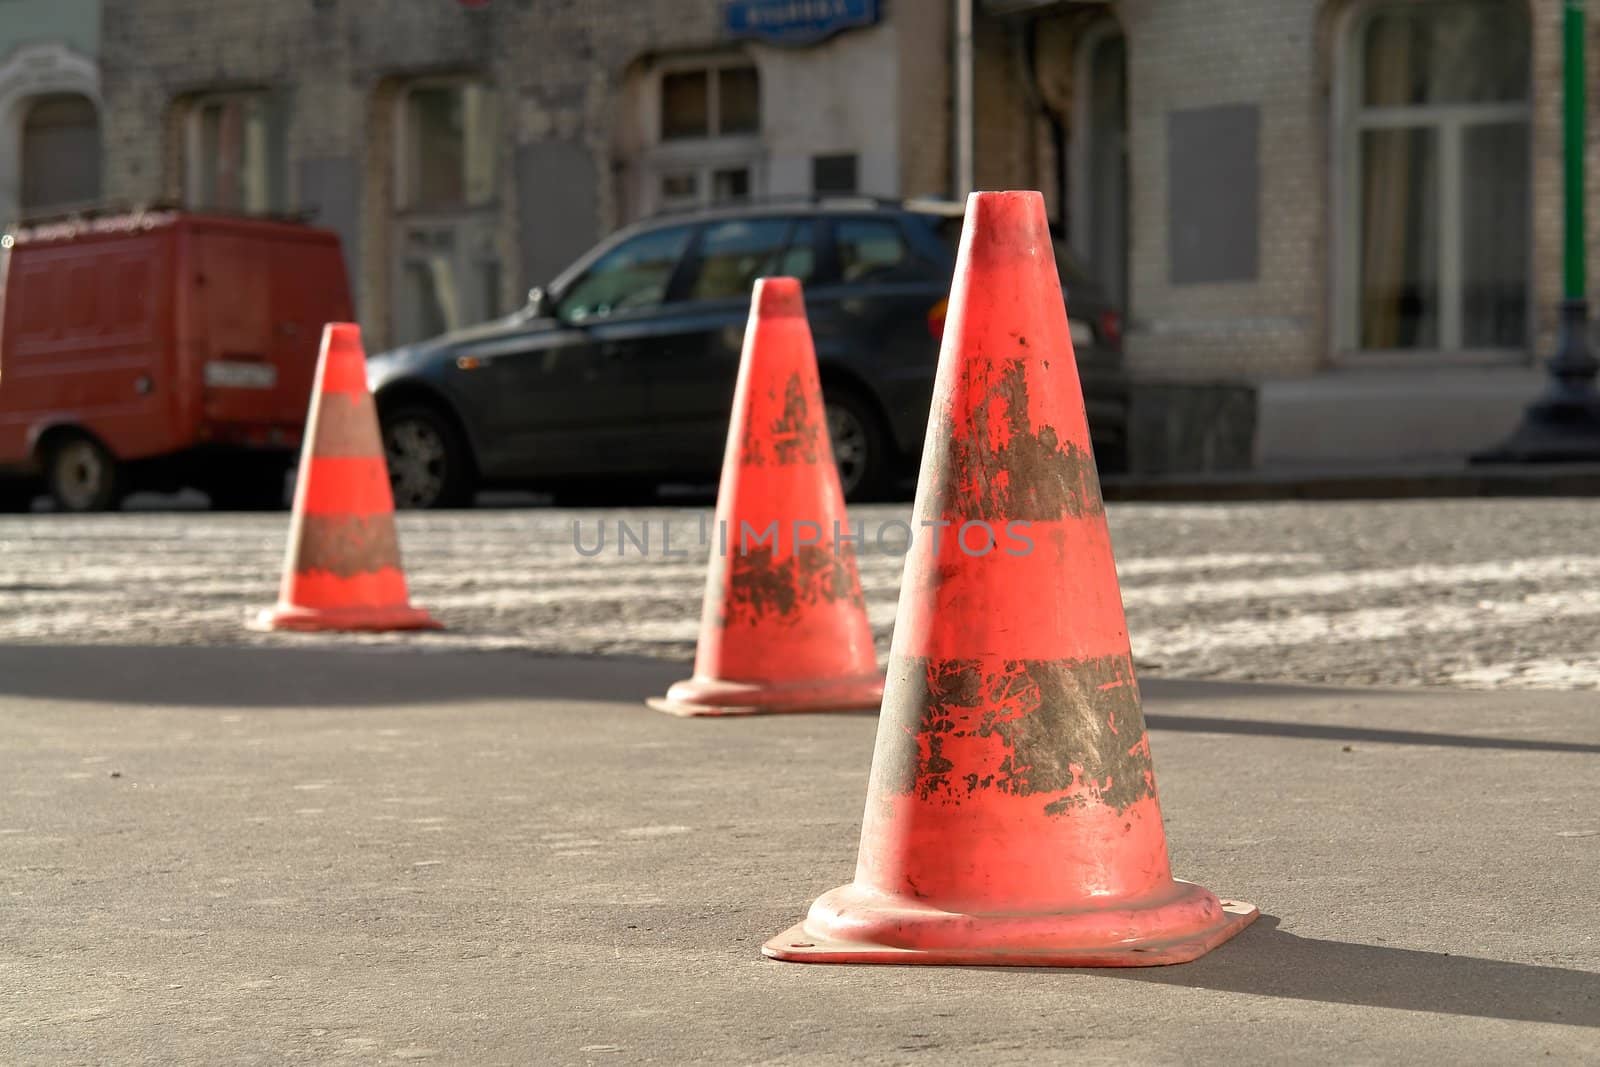 the cone is used at road works as a warning mark